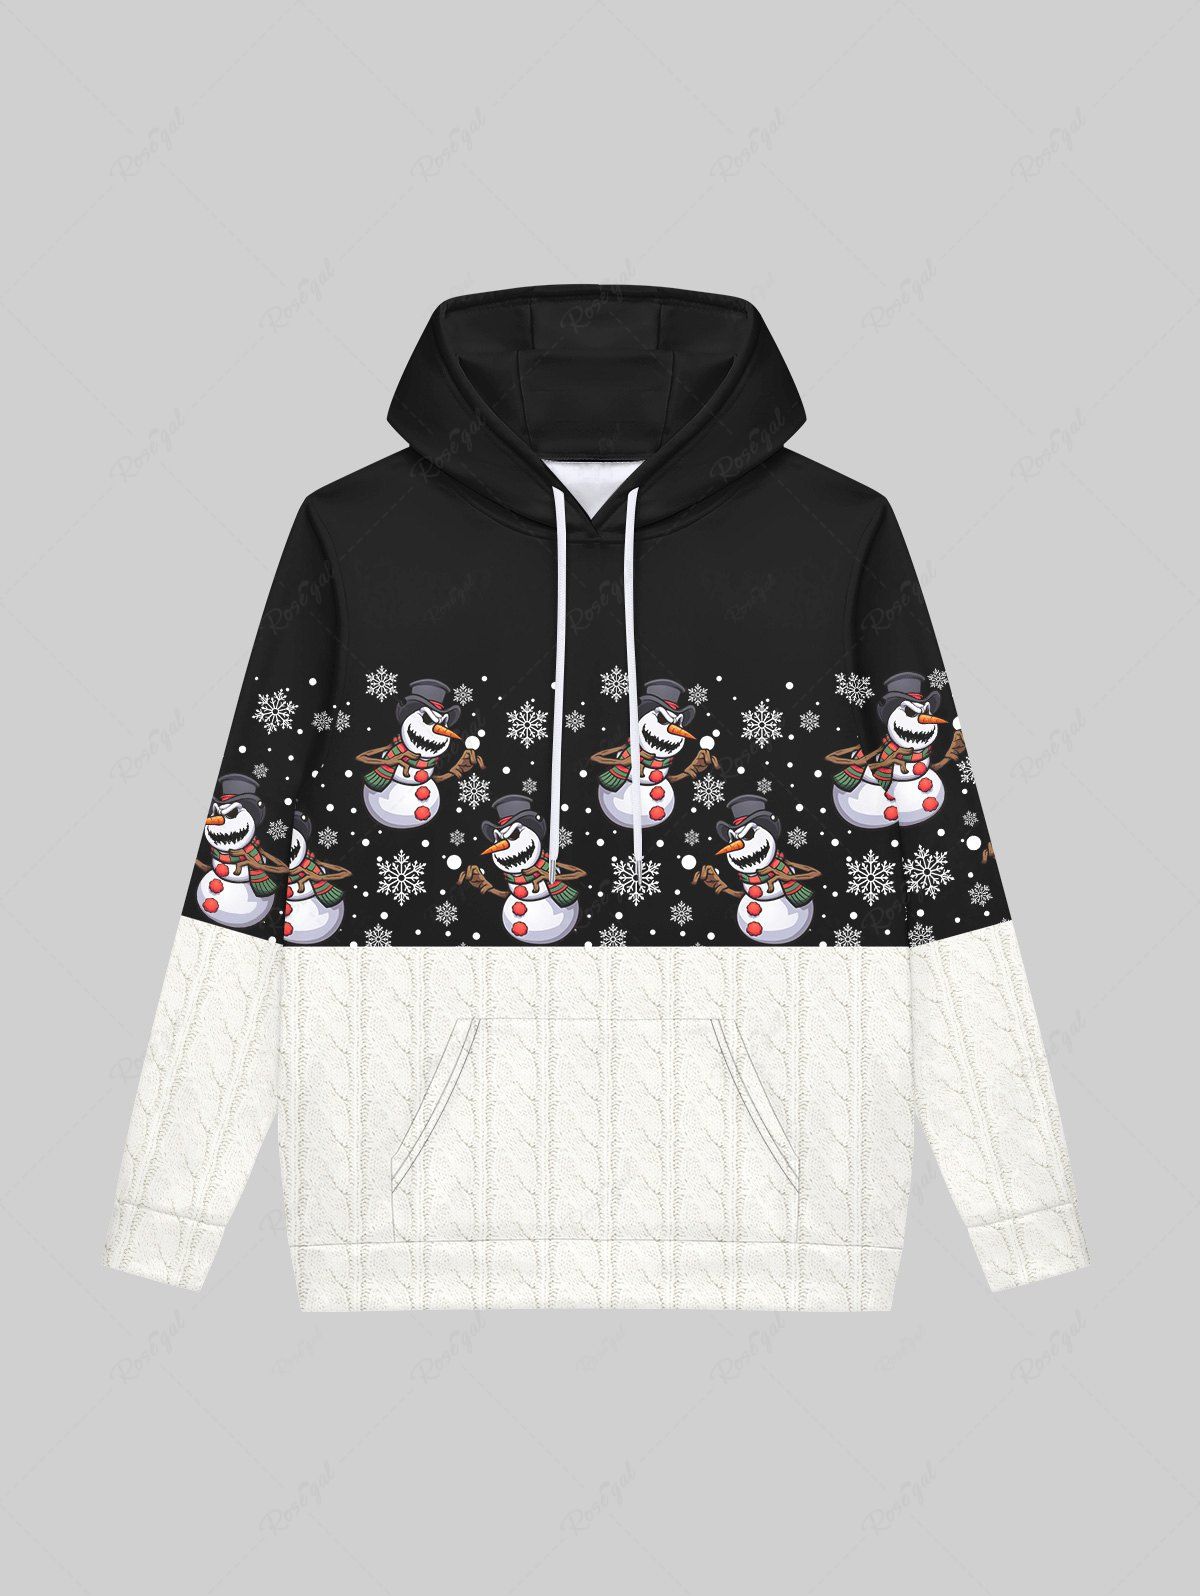 Fashion Gothic Christmas Colorblock Snowman Sowflake Cable Knit 3D Print Pockets Drawstring Hoodie For Men  